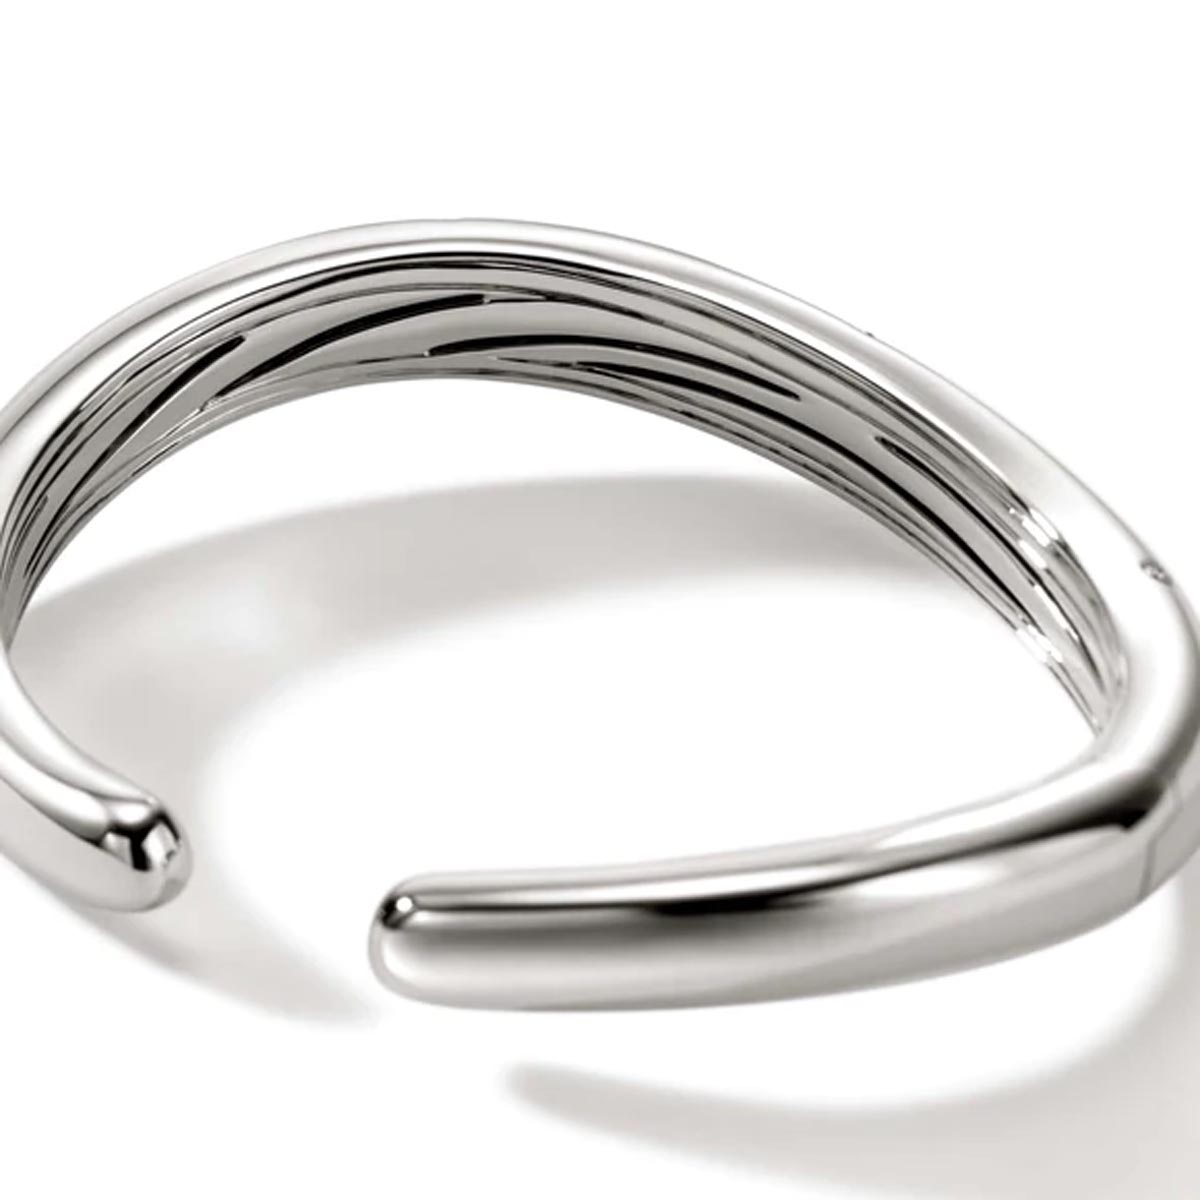 John Hardy Surf Collection Kick Cuff Bracelet in Sterling Silver with Diamonds (3/8ct tw)